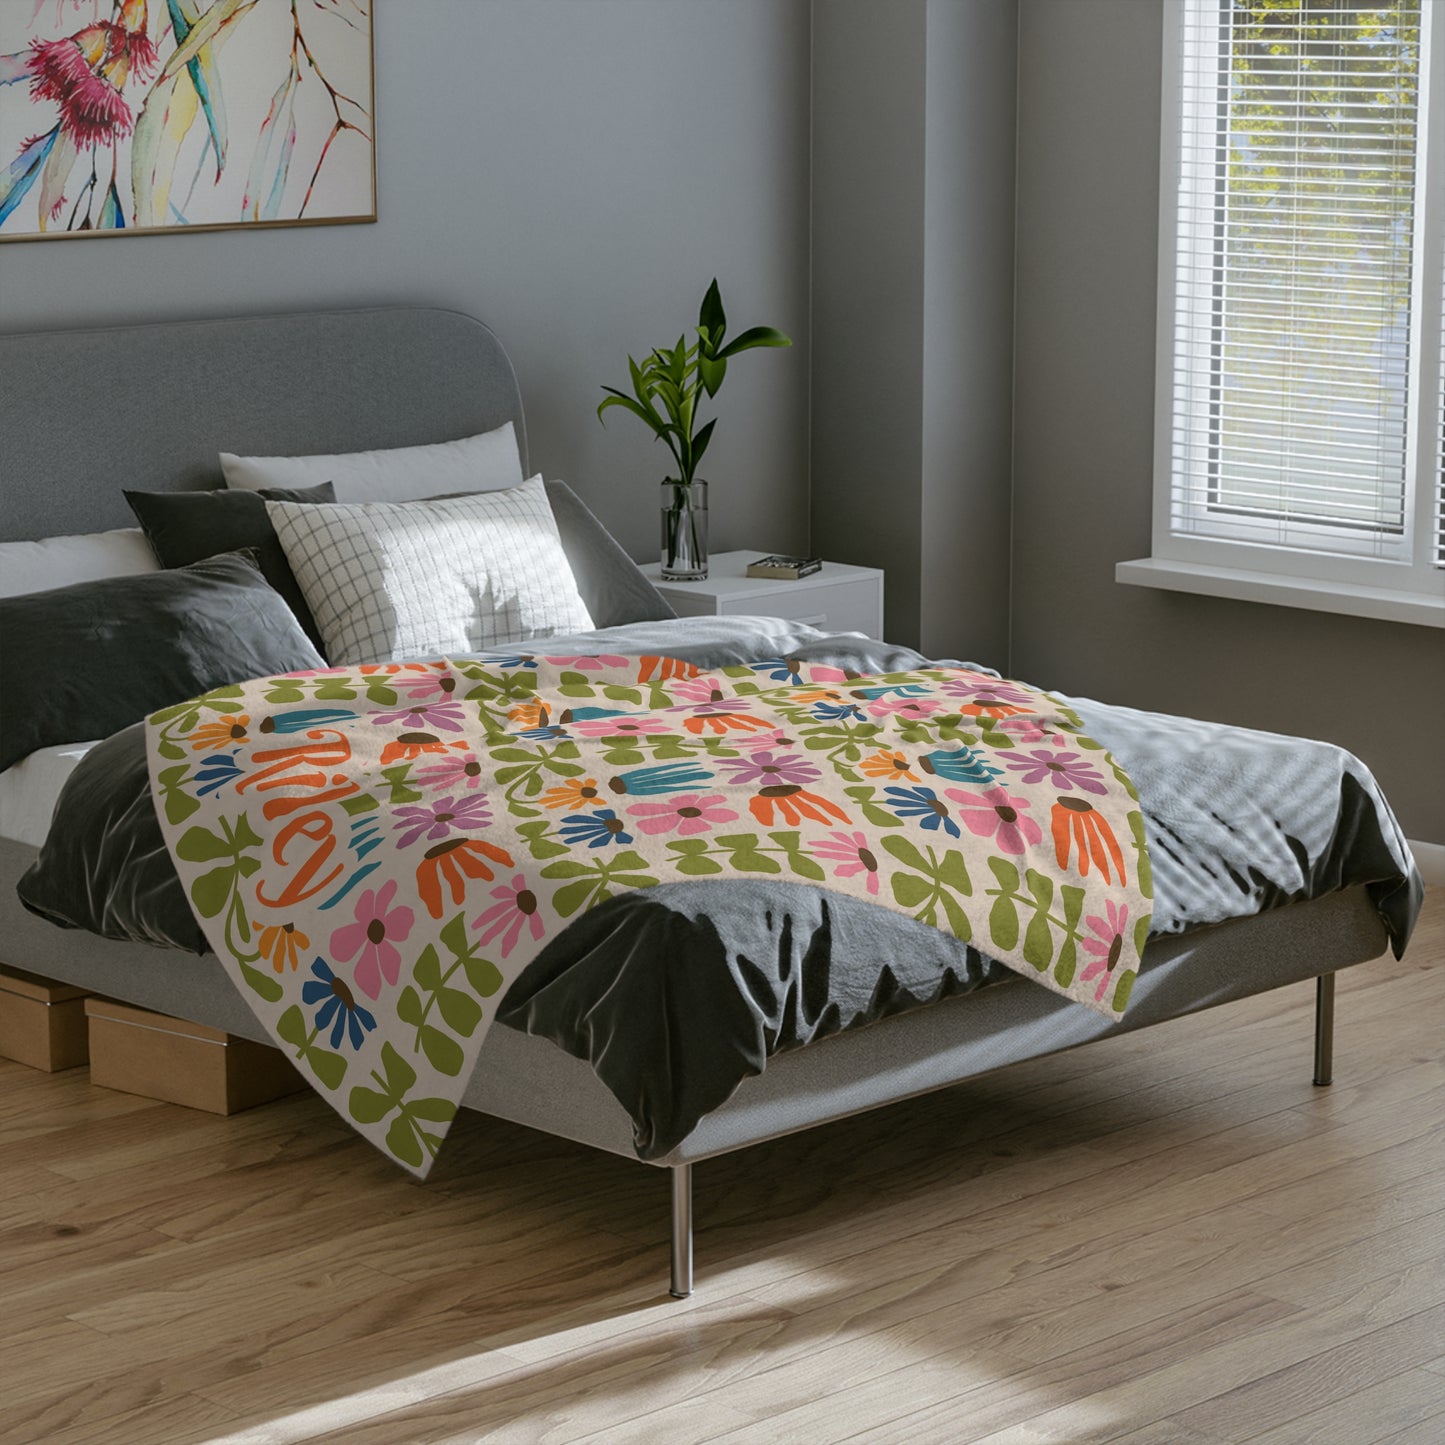 Personalised Groovy Floral Checkered Blanket